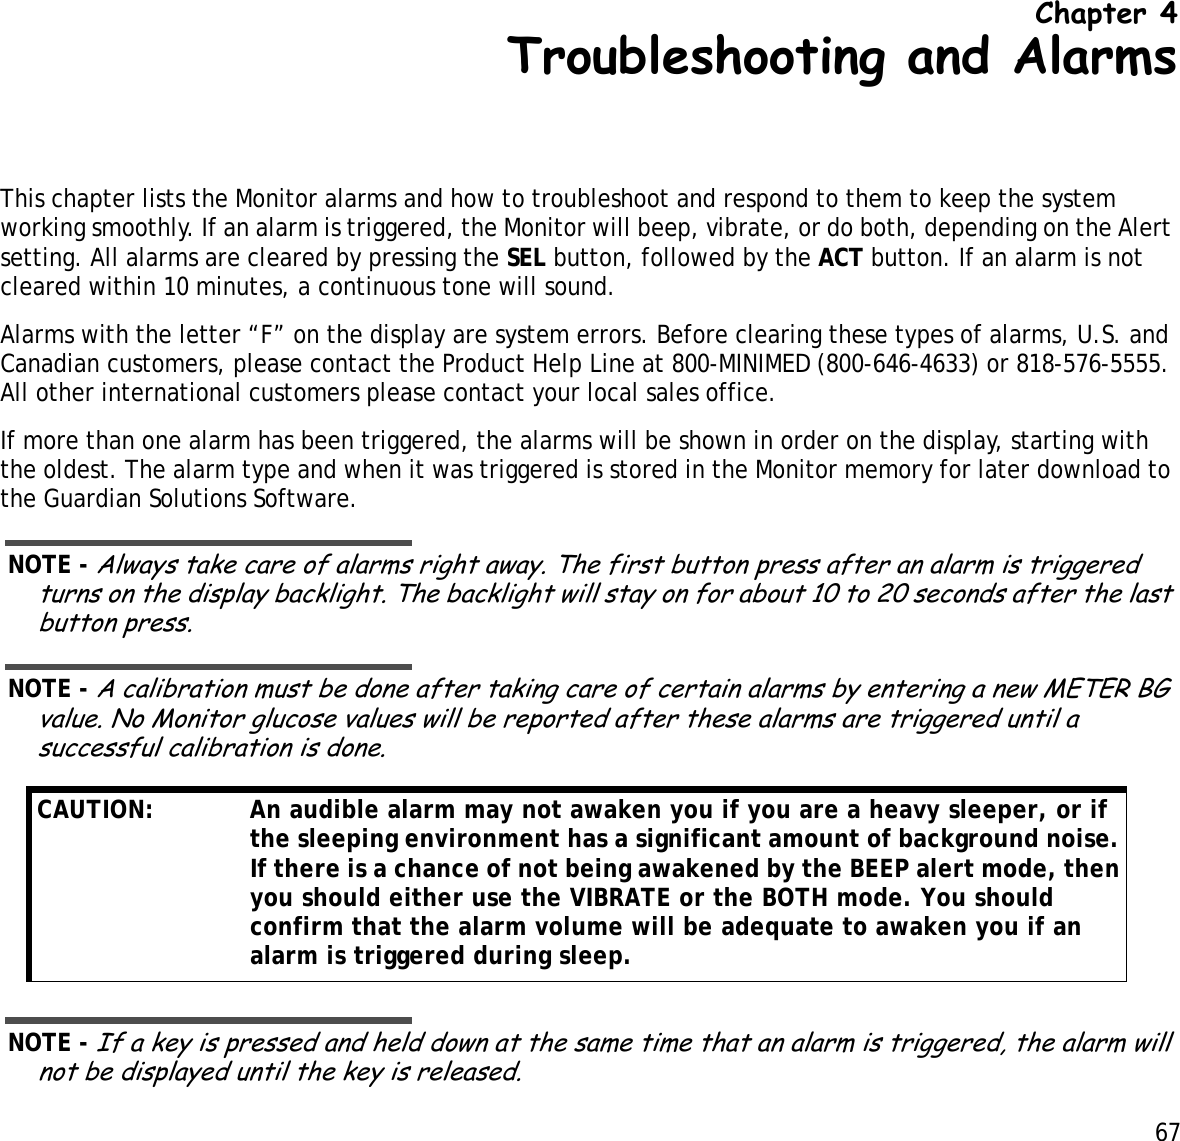 67 Chapter 4Troubleshooting and AlarmsThis chapter lists the Monitor alarms and how to troubleshoot and respond to them to keep the system working smoothly. If an alarm is triggered, the Monitor will beep, vibrate, or do both, depending on the Alert setting. All alarms are cleared by pressing the SEL button, followed by the ACT button. If an alarm is not cleared within 10 minutes, a continuous tone will sound. Alarms with the letter “F” on the display are system errors. Before clearing these types of alarms, U.S. and Canadian customers, please contact the Product Help Line at 800-MINIMED (800-646-4633) or 818-576-5555. All other international customers please contact your local sales office.If more than one alarm has been triggered, the alarms will be shown in order on the display, starting with the oldest. The alarm type and when it was triggered is stored in the Monitor memory for later download to the Guardian Solutions Software.NOTE - Always take care of alarms right away. The first button press after an alarm is triggered turns on the display backlight. The backlight will stay on for about 10 to 20 seconds after the last button press.NOTE - A calibration must be done after taking care of certain alarms by entering a new METER BG value. No Monitor glucose values will be reported after these alarms are triggered until a successful calibration is done.NOTE - If a key is pressed and held down at the same time that an alarm is triggered, the alarm will not be displayed until the key is released.CAUTION:  An audible alarm may not awaken you if you are a heavy sleeper, or if the sleeping environment has a significant amount of background noise. If there is a chance of not being awakened by the BEEP alert mode, then you should either use the VIBRATE or the BOTH mode. You should confirm that the alarm volume will be adequate to awaken you if an alarm is triggered during sleep.